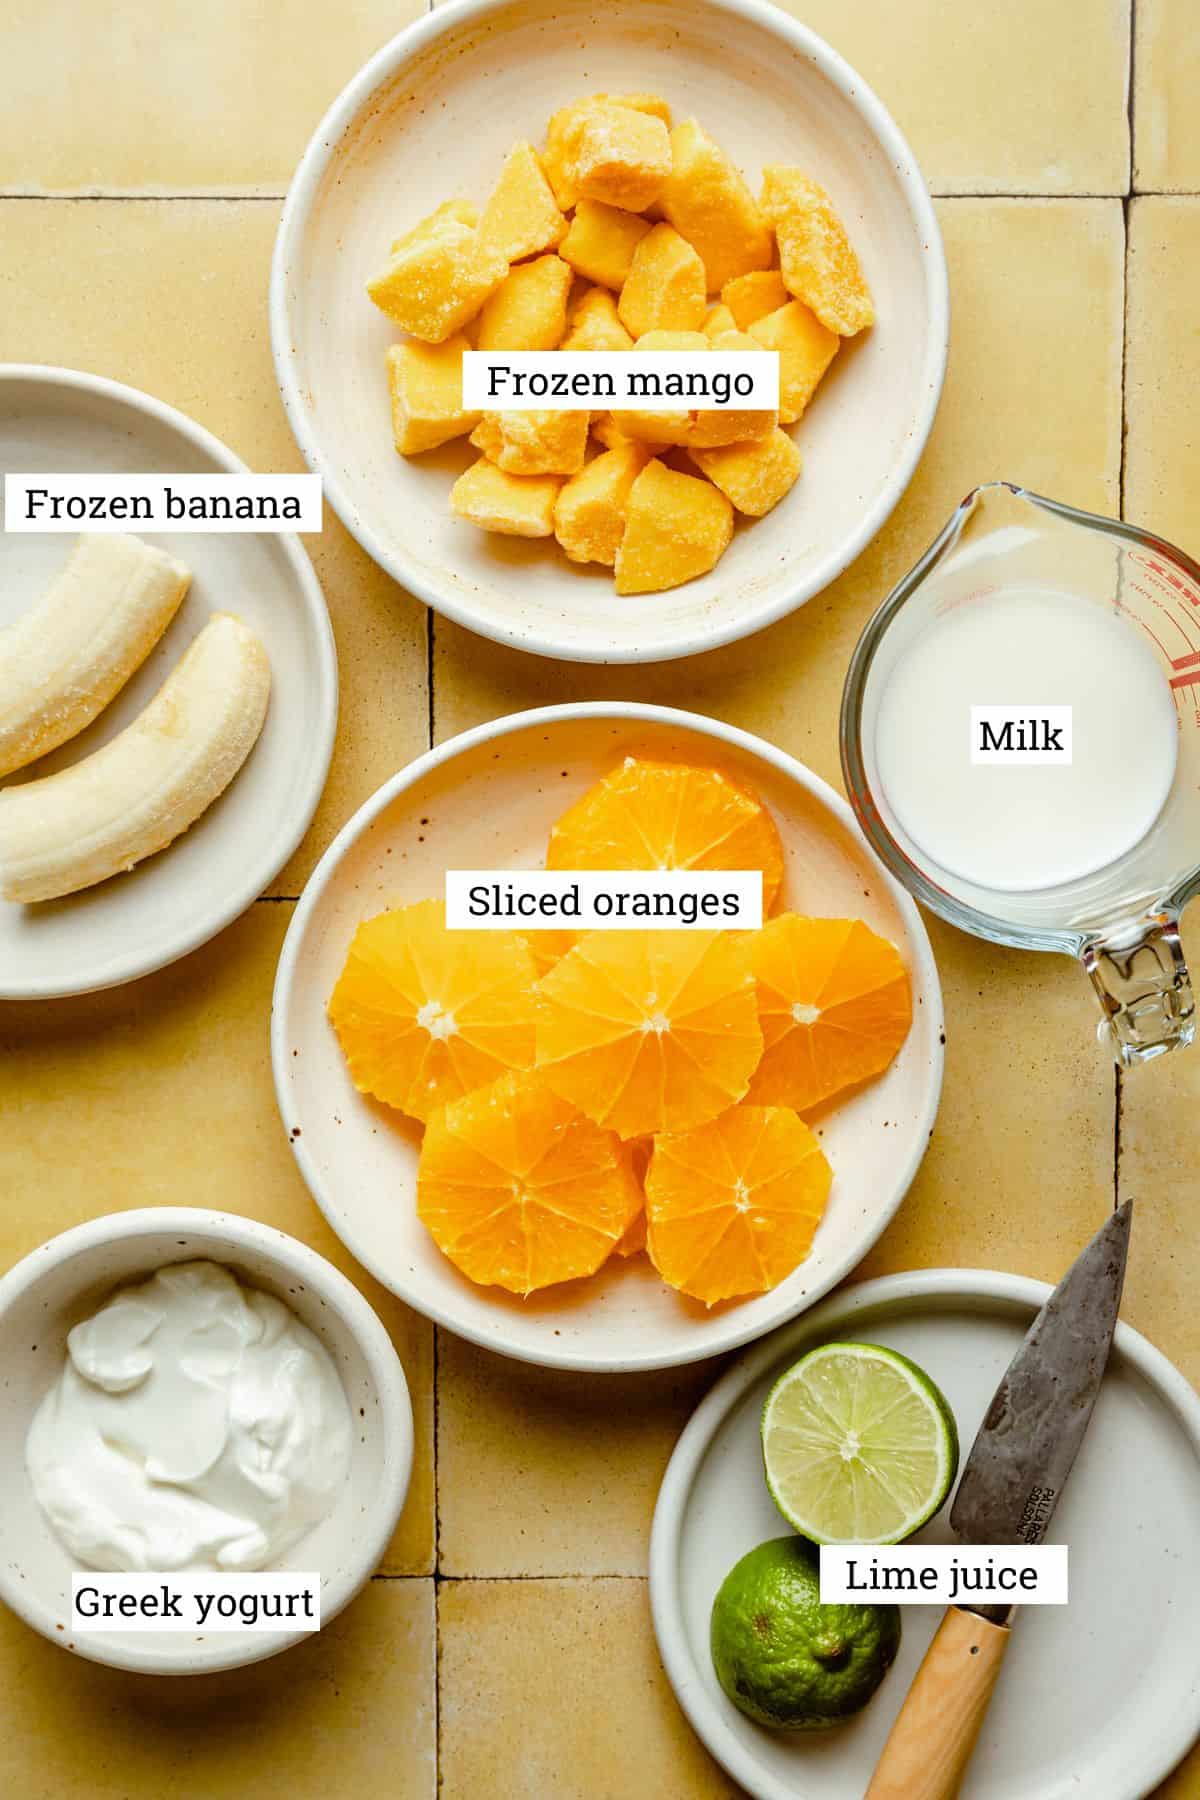 Ingredients in various bowls with labels.